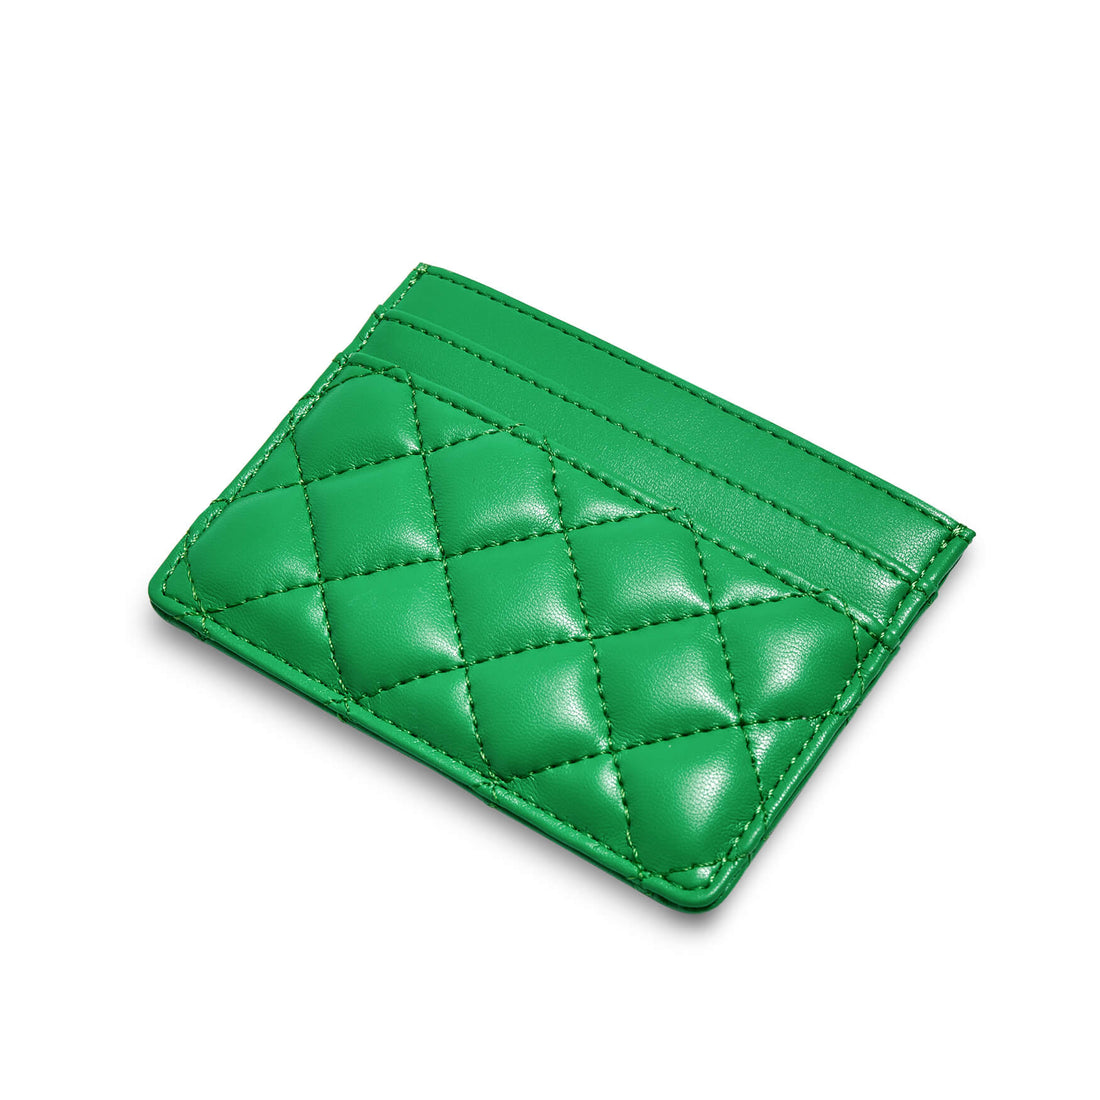 SINBONO Embossed Leather Business Card Holder Grass Green - Grass Green Leather Wallet